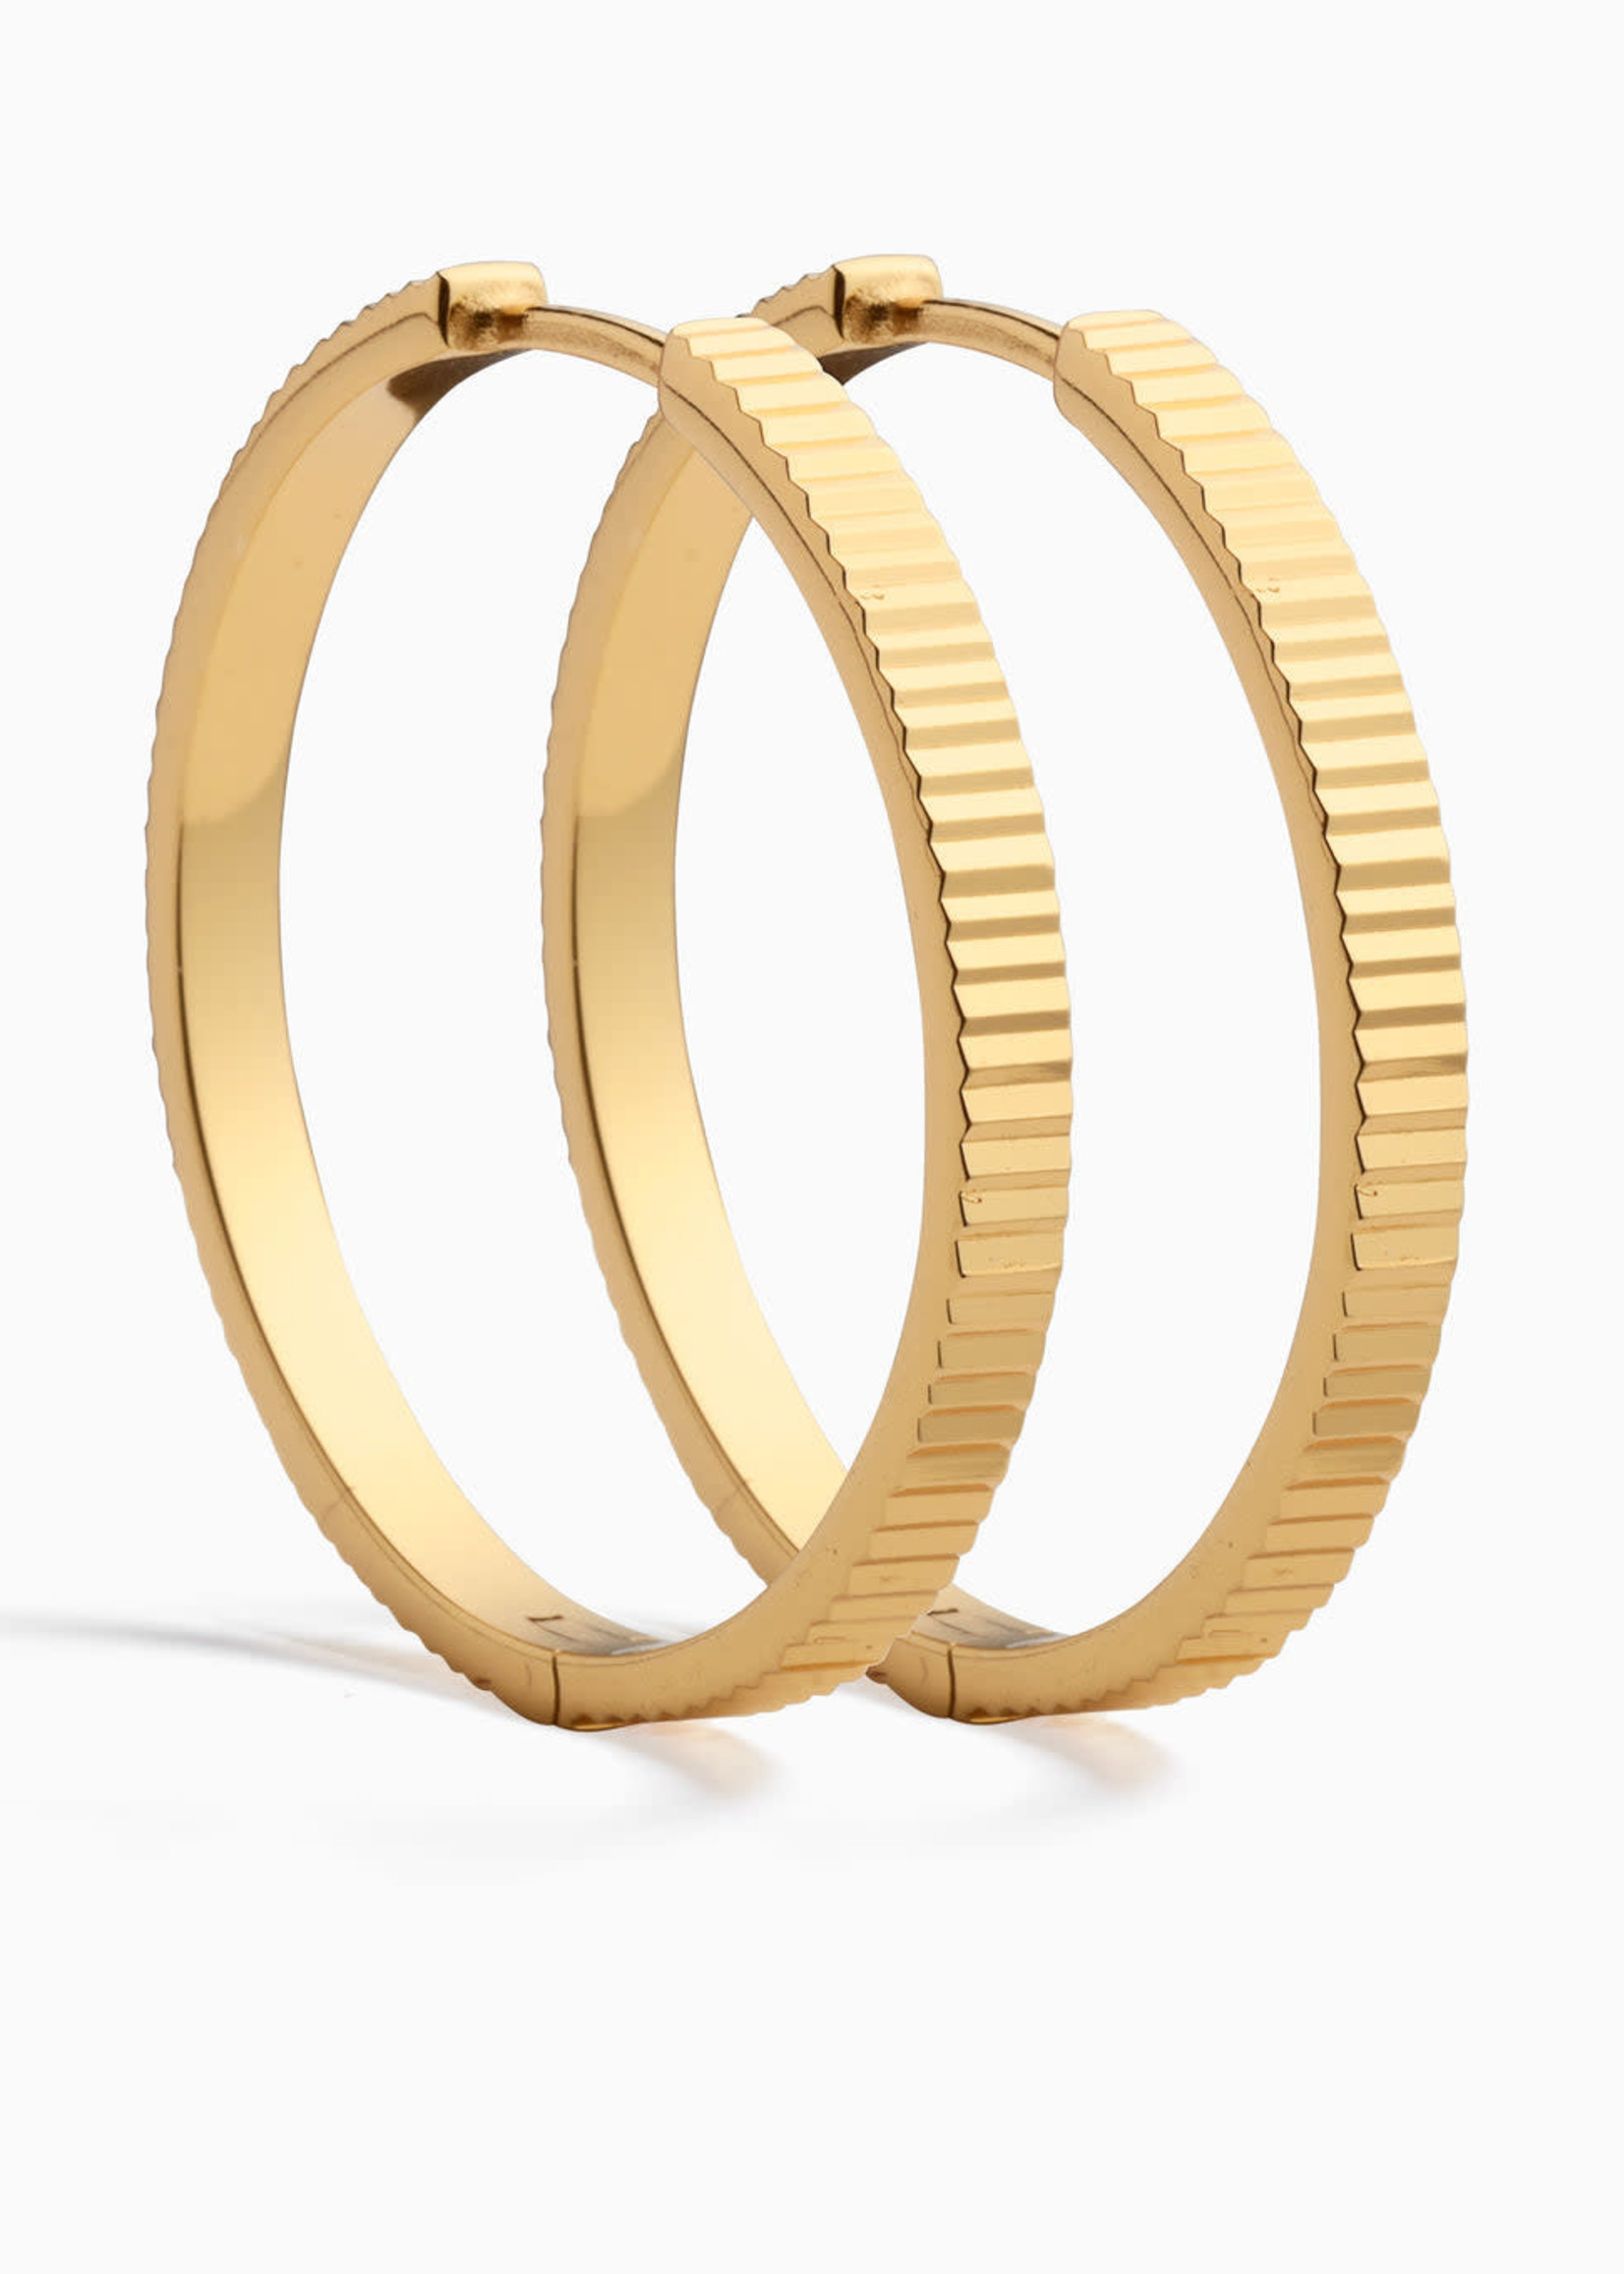 Eline Rosina Hailey Statement Hoops Gold Plated